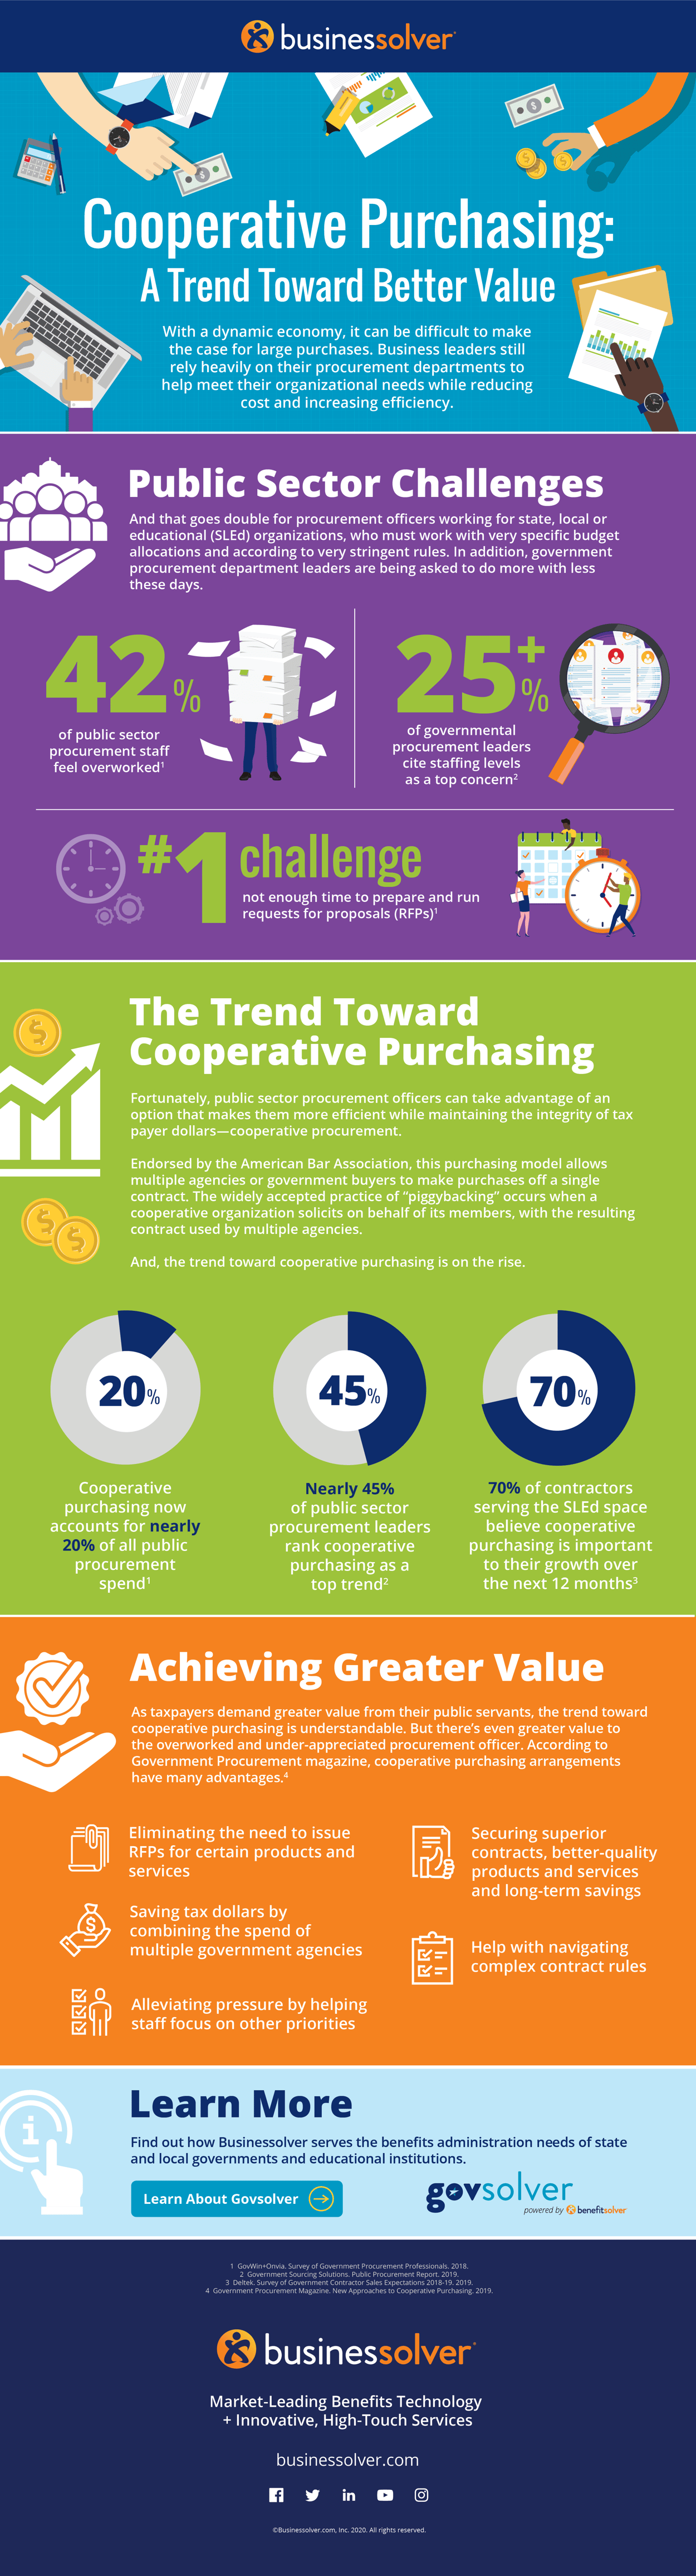 lp-static-img-cooperative-purchasing-a-trend-toward-better-value